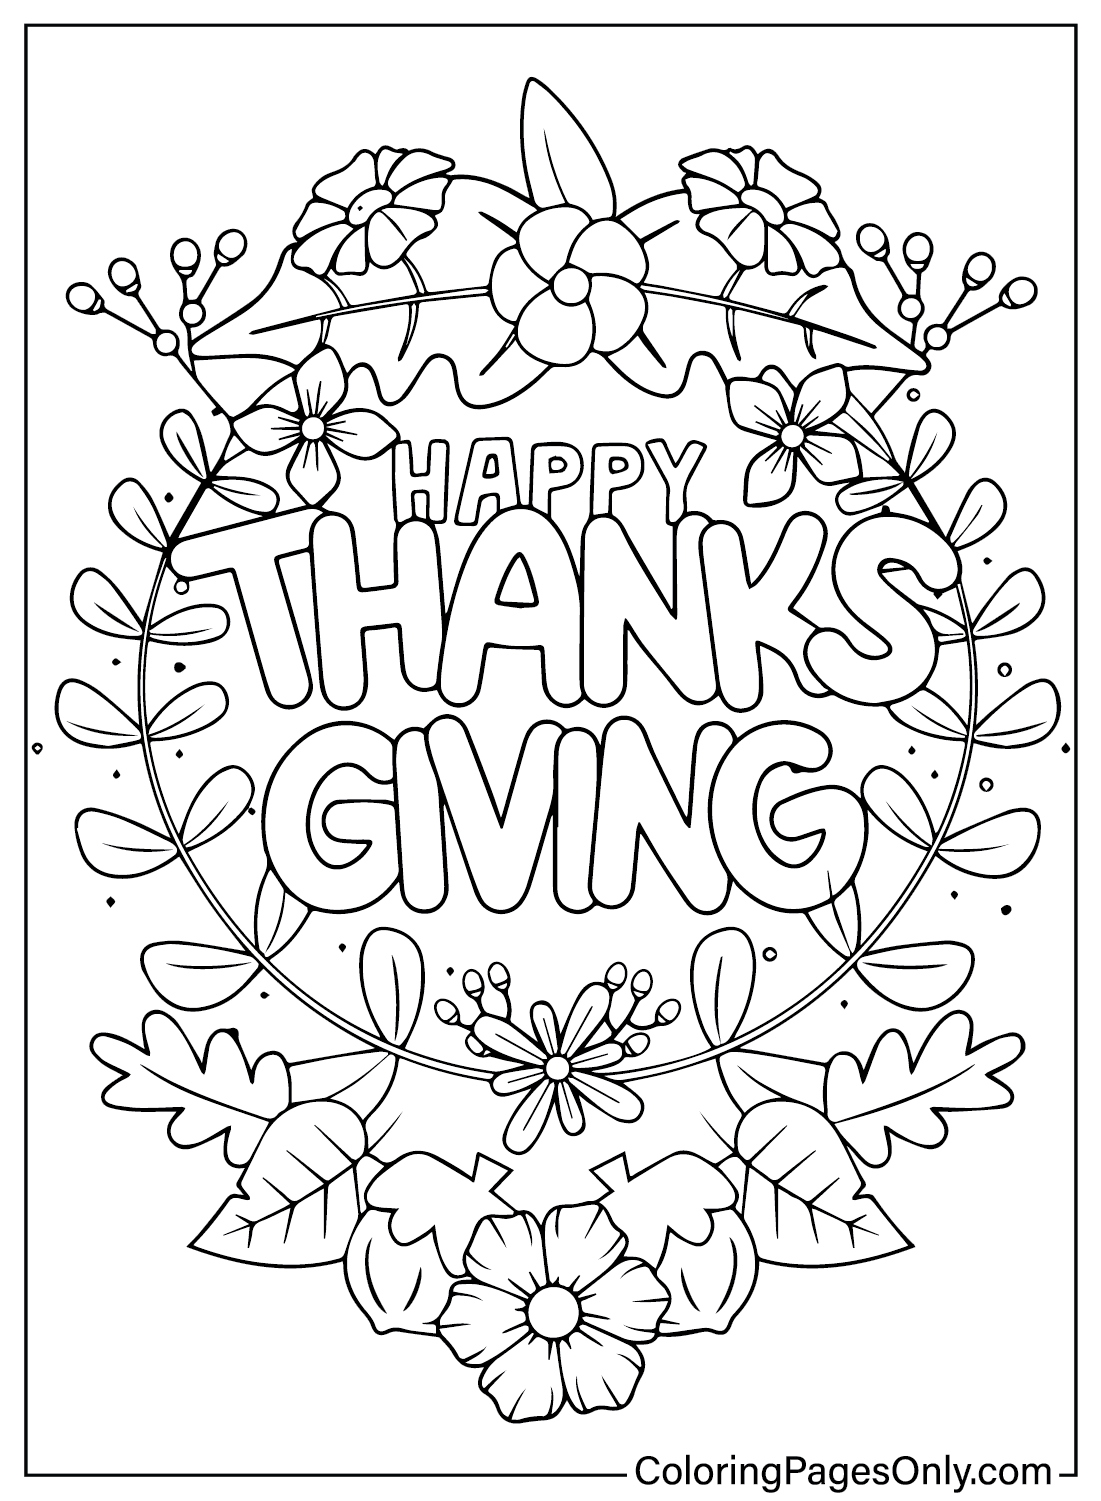 Free Thanksgiving Coloring Page